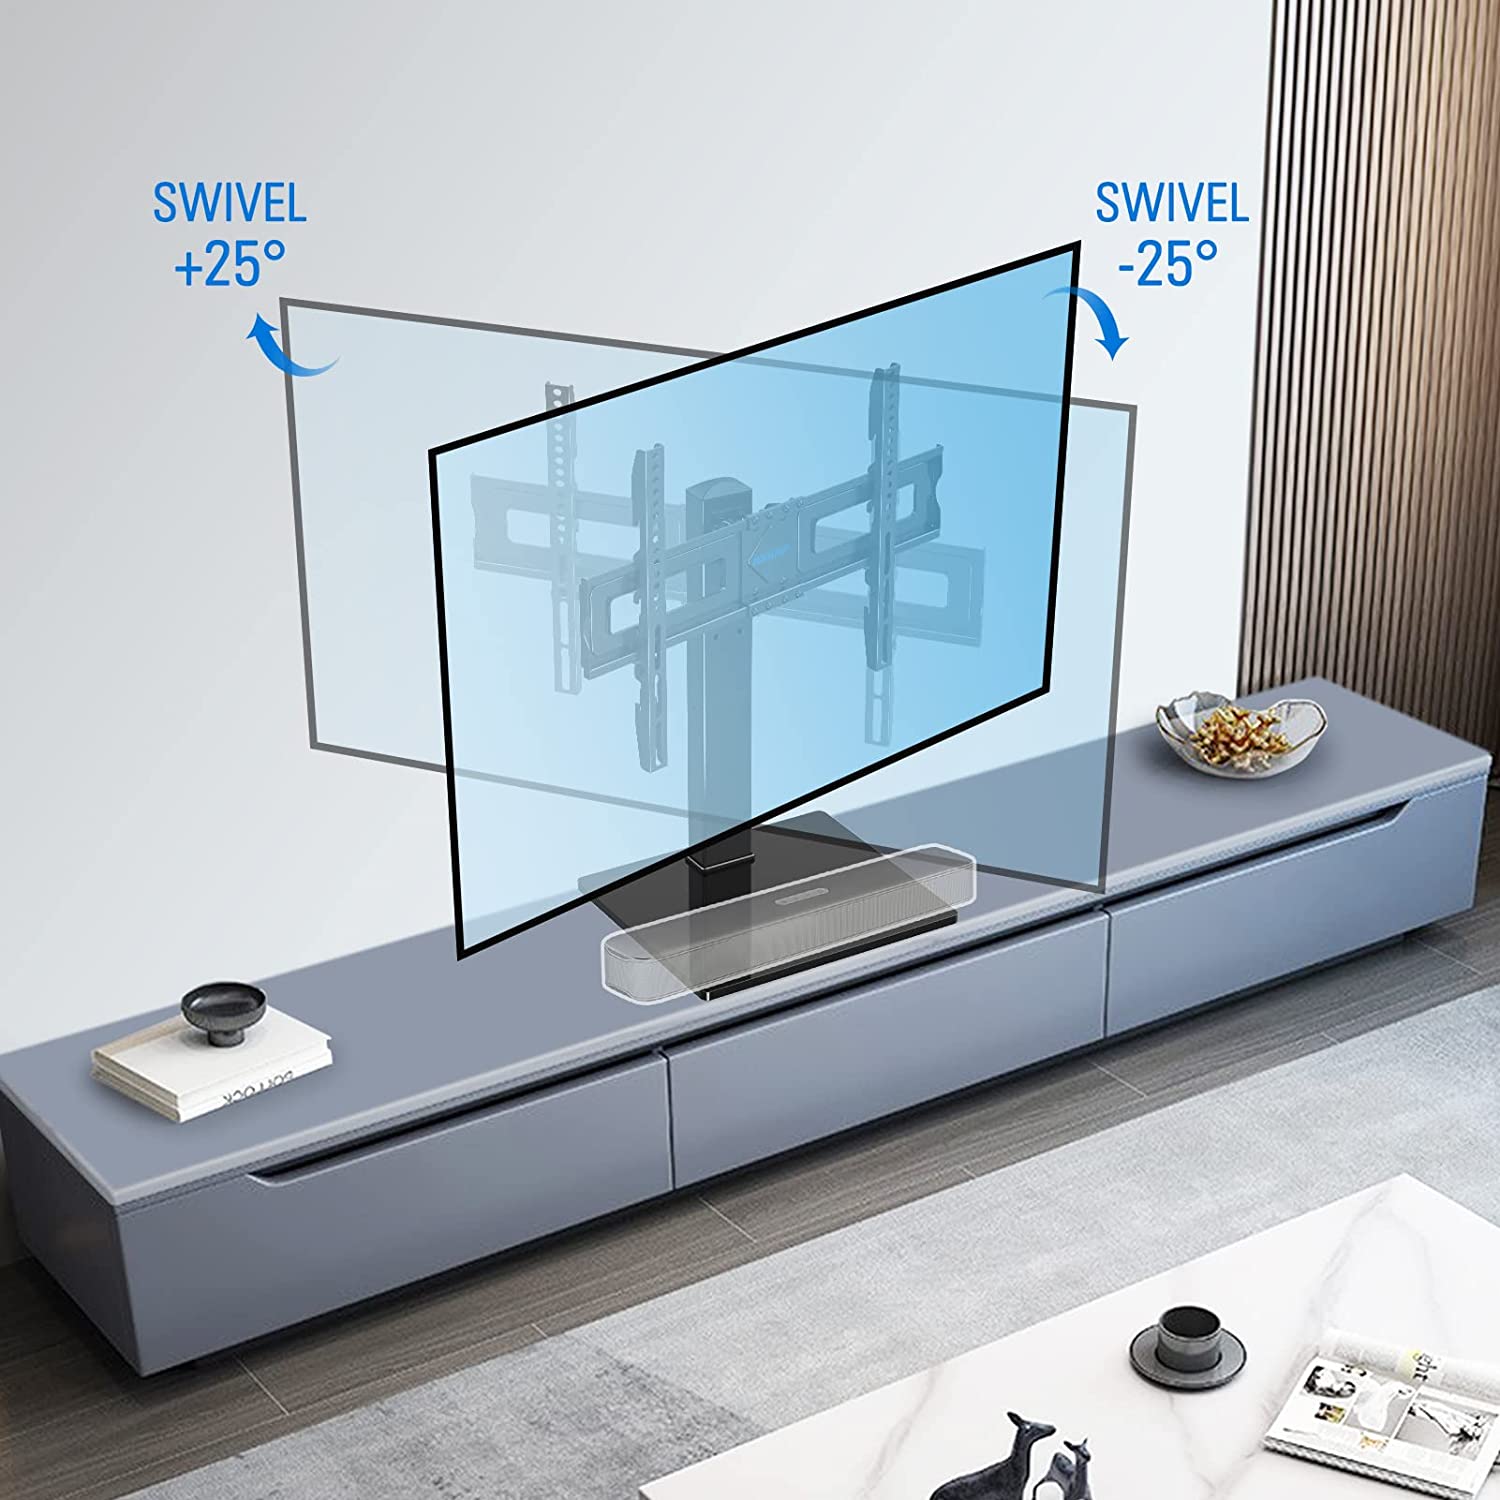 TV swivel stand provides a 40° of swivel for flexible viewing